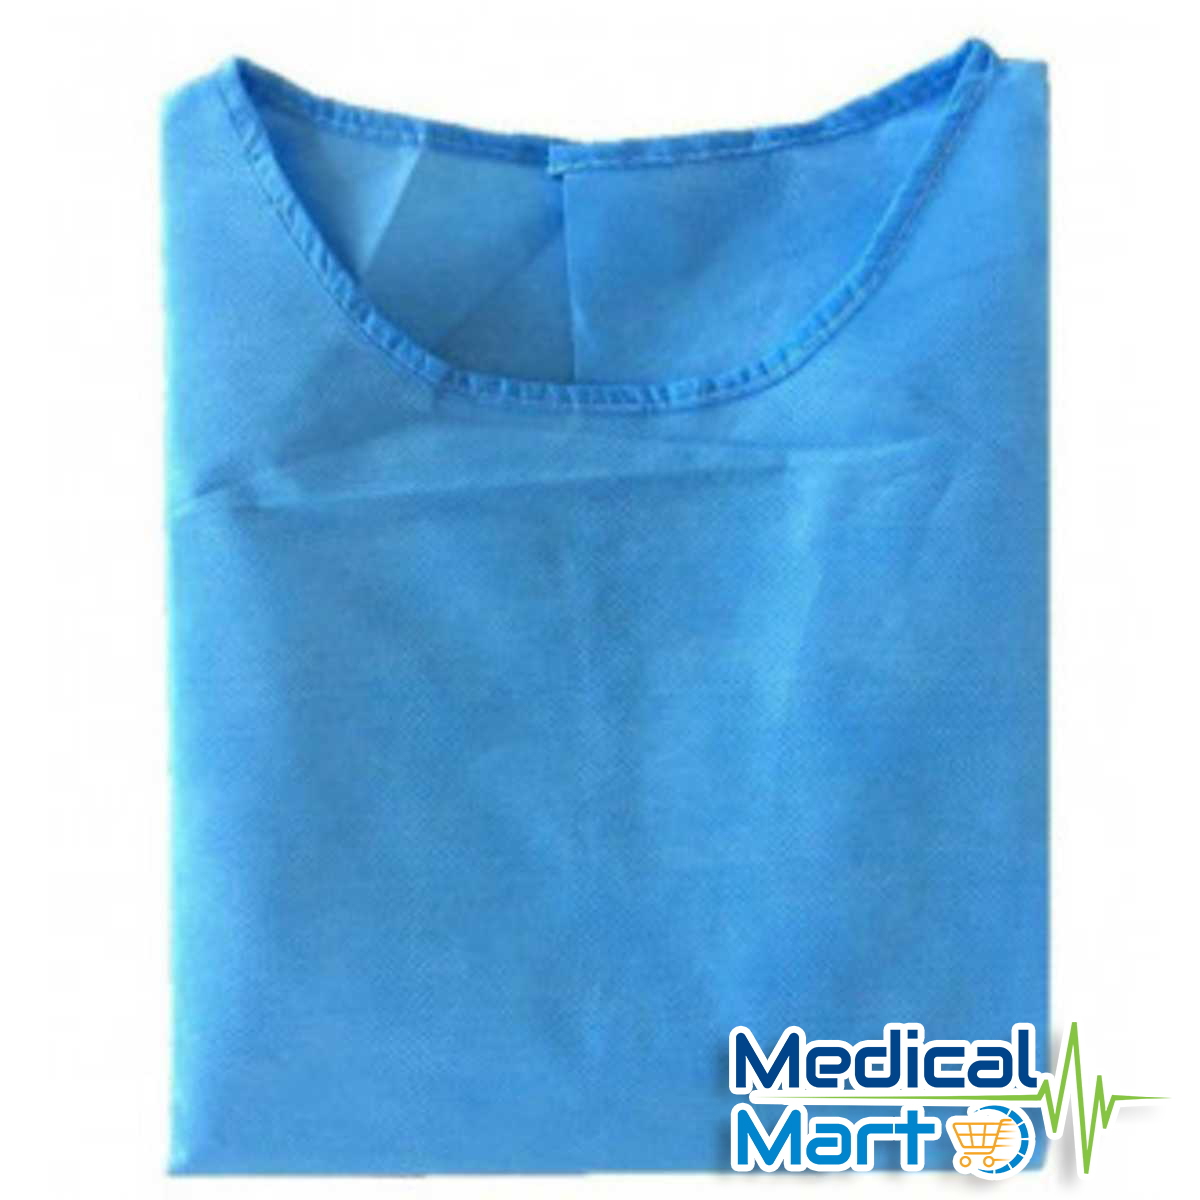 PPE Isolation Gown Blue 25GSM